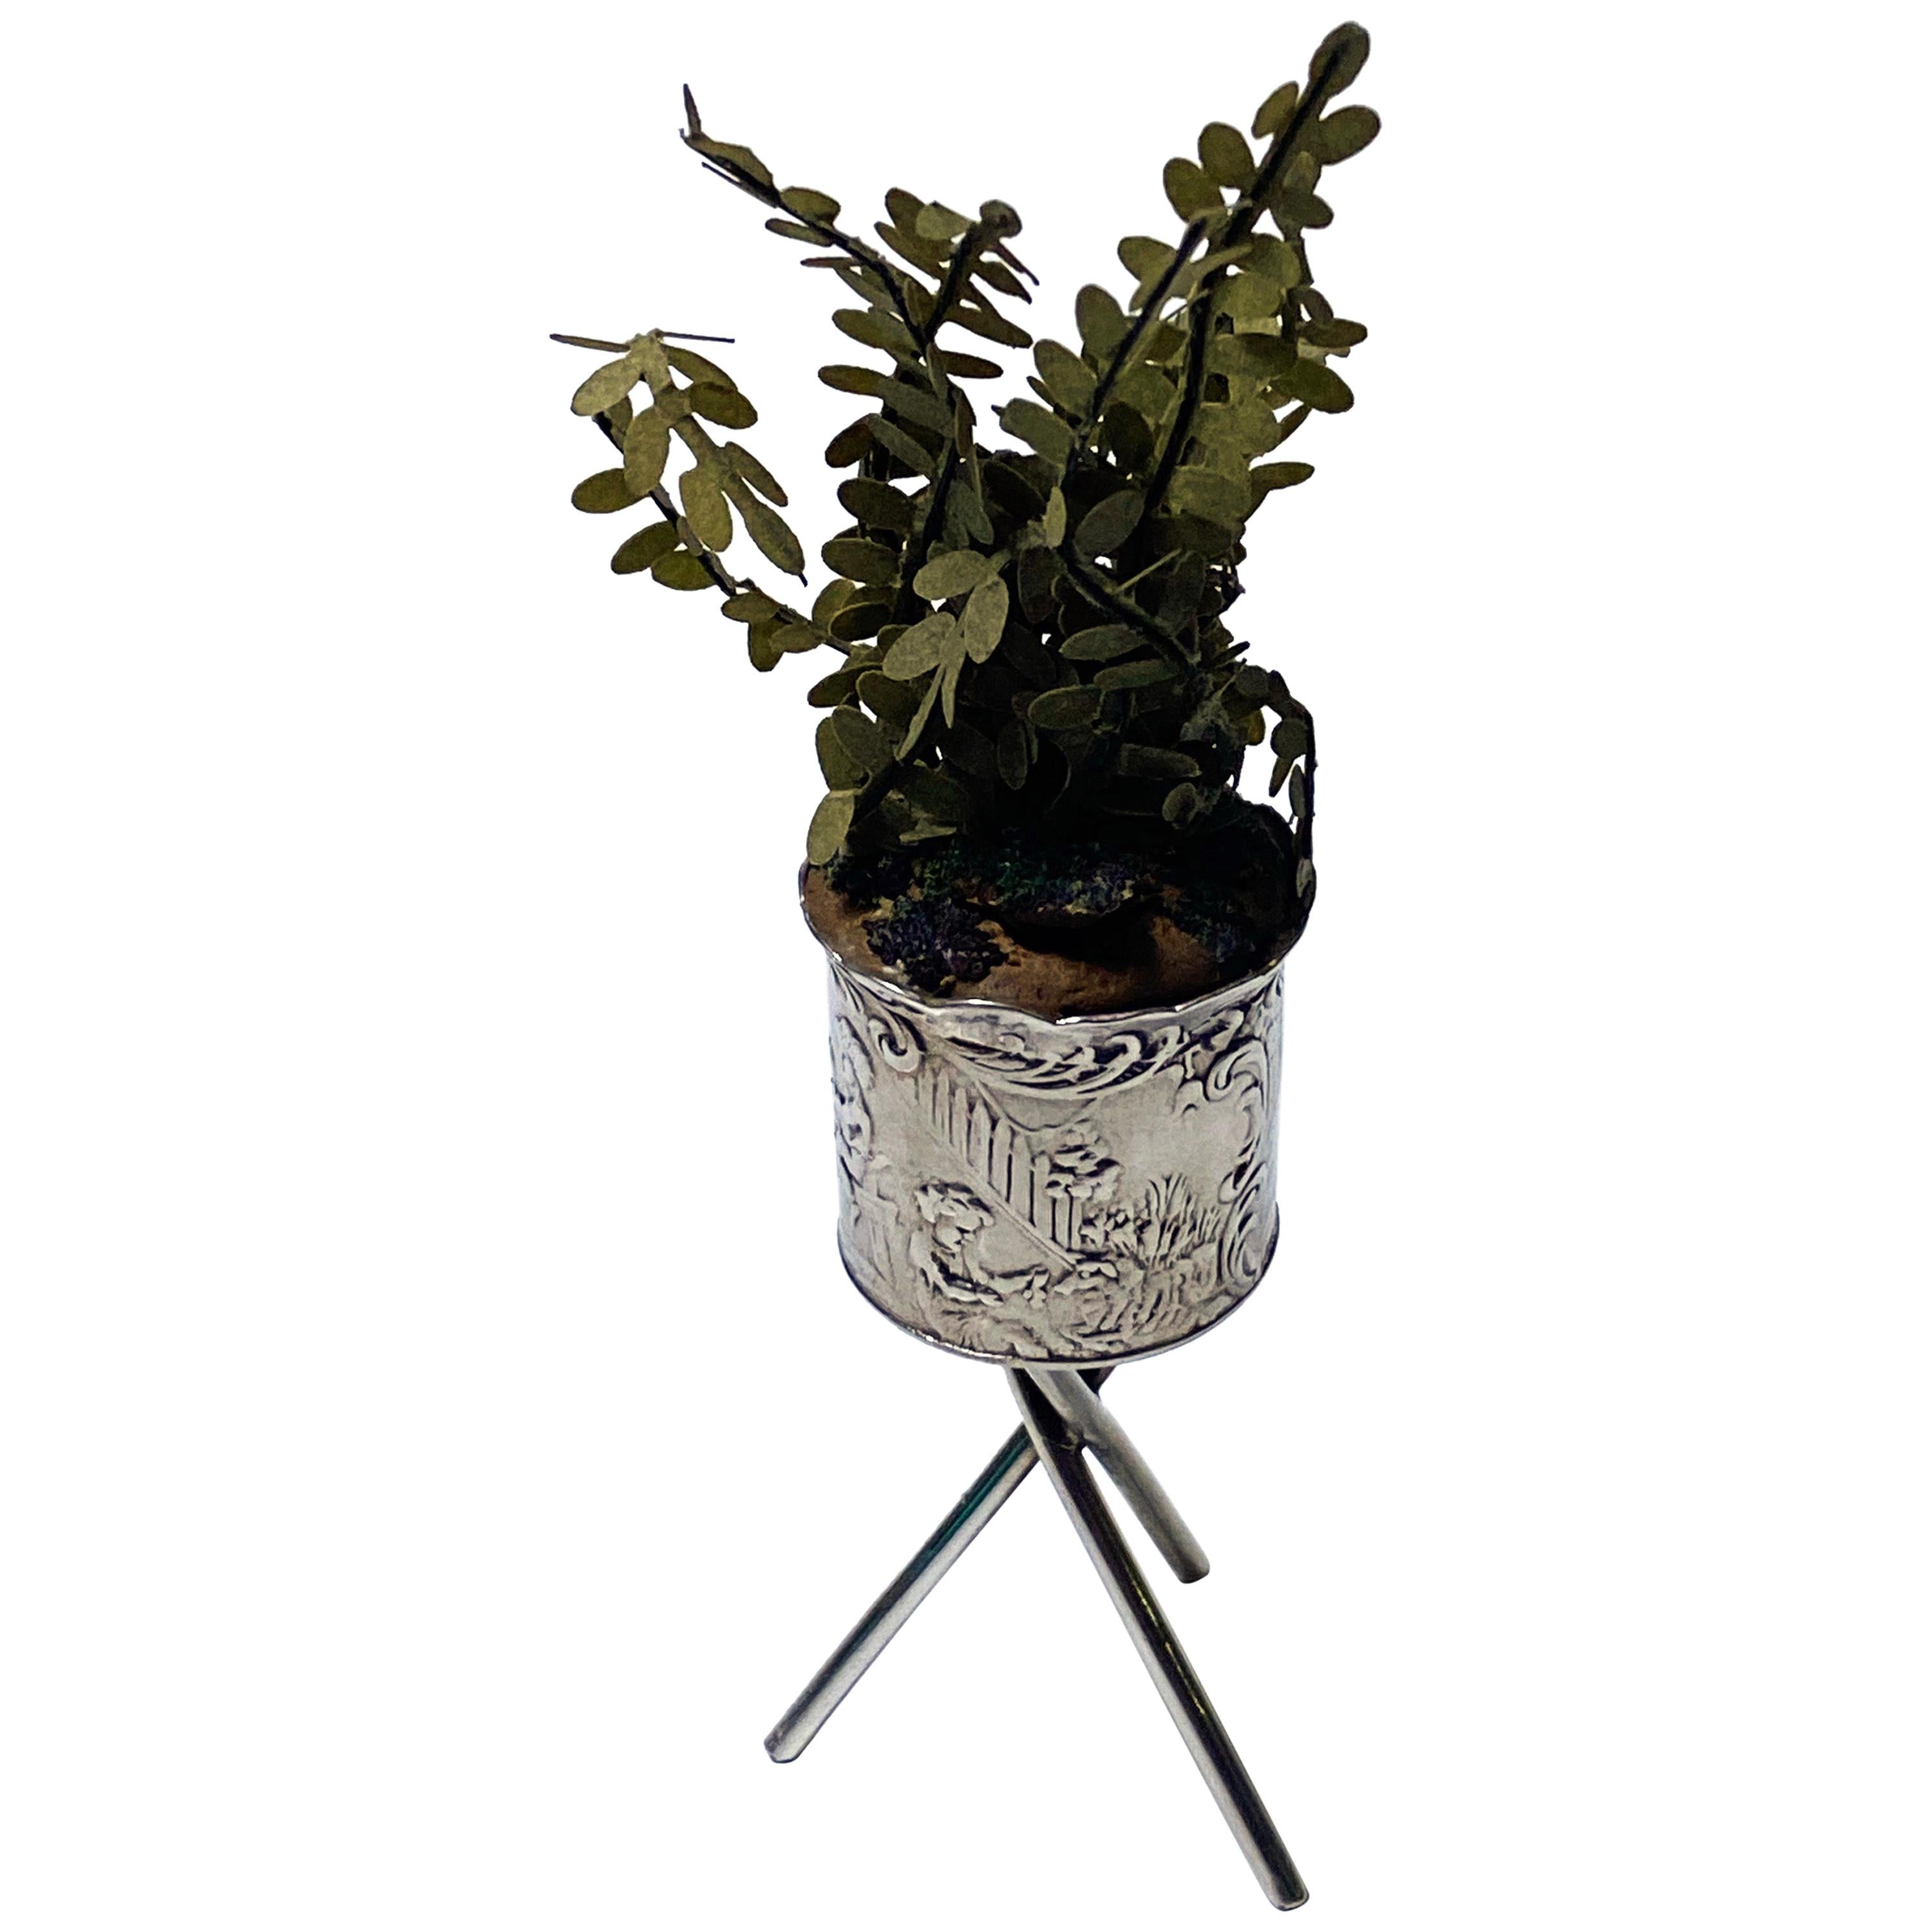 Antique Silver Miniature Planter and Stand, Germany, circa 1900